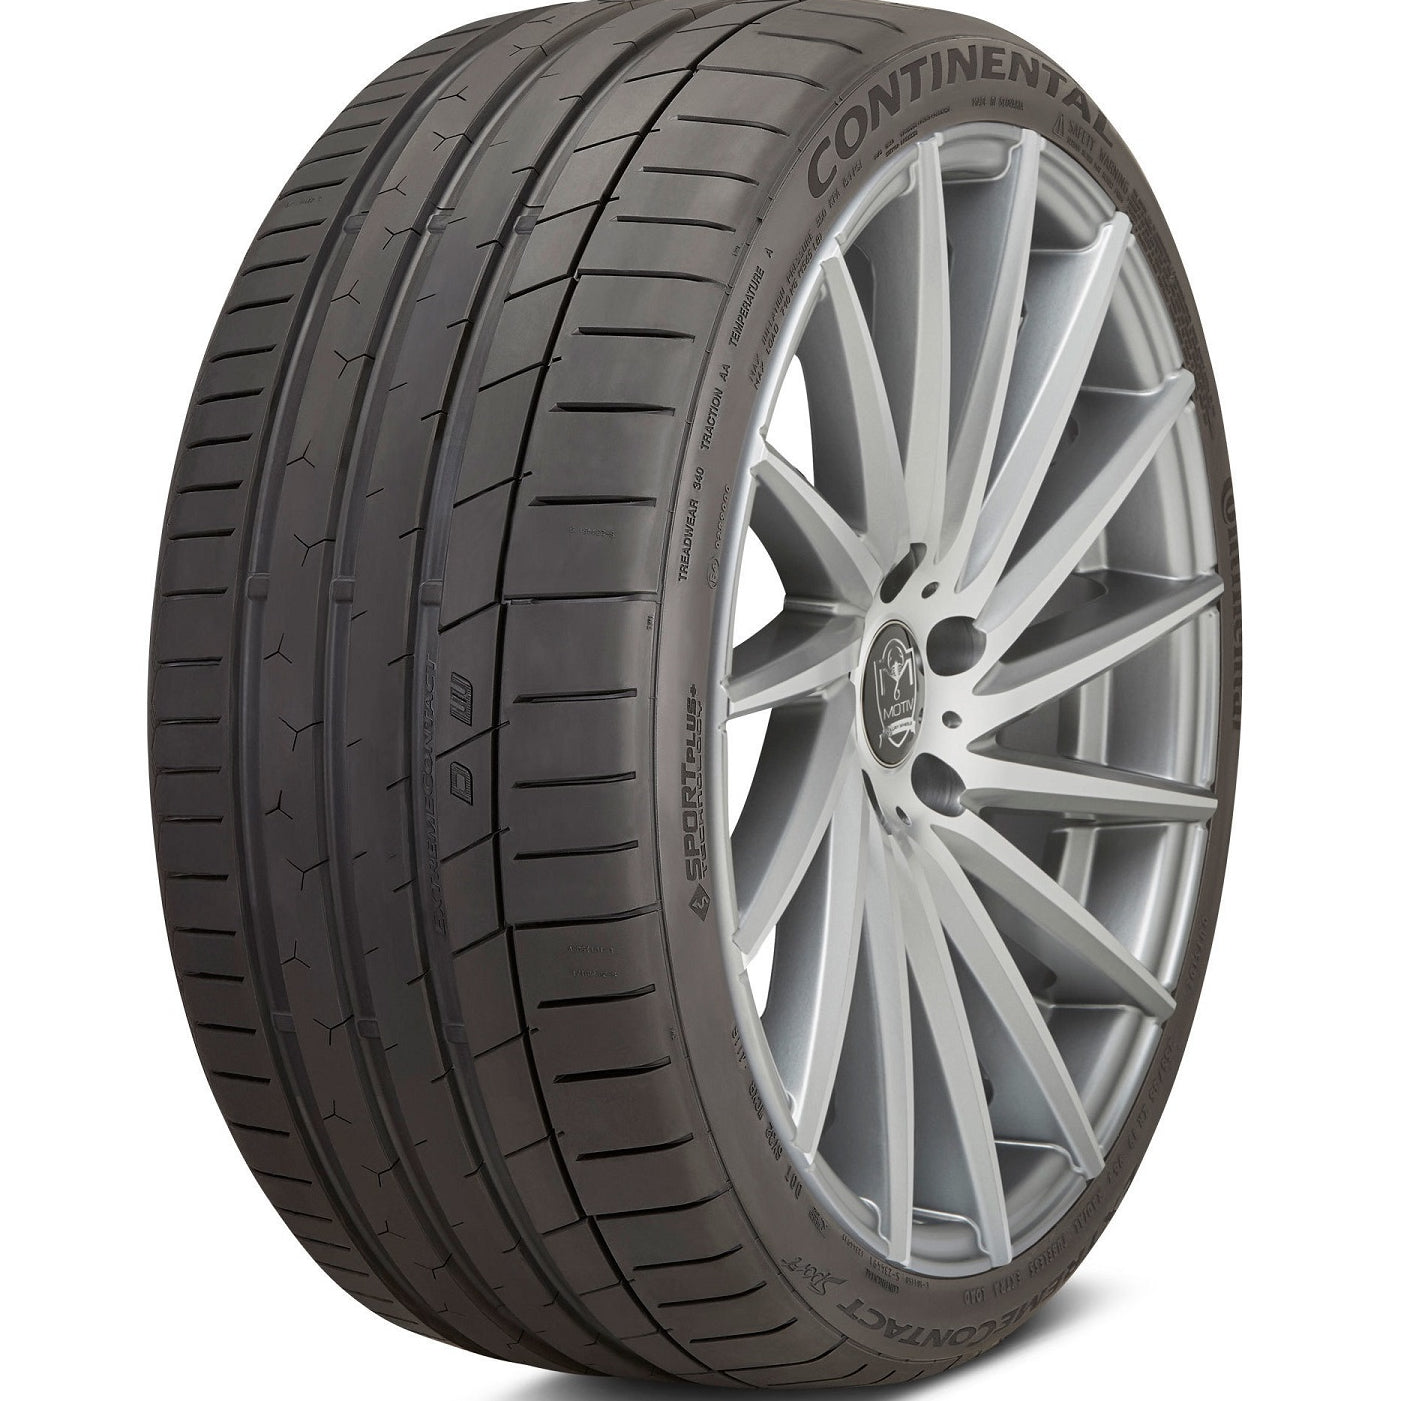 CONTINENTAL EXTREMECONTACT SPORT 225/35ZR19 (25.2X8.9R 19) Tires